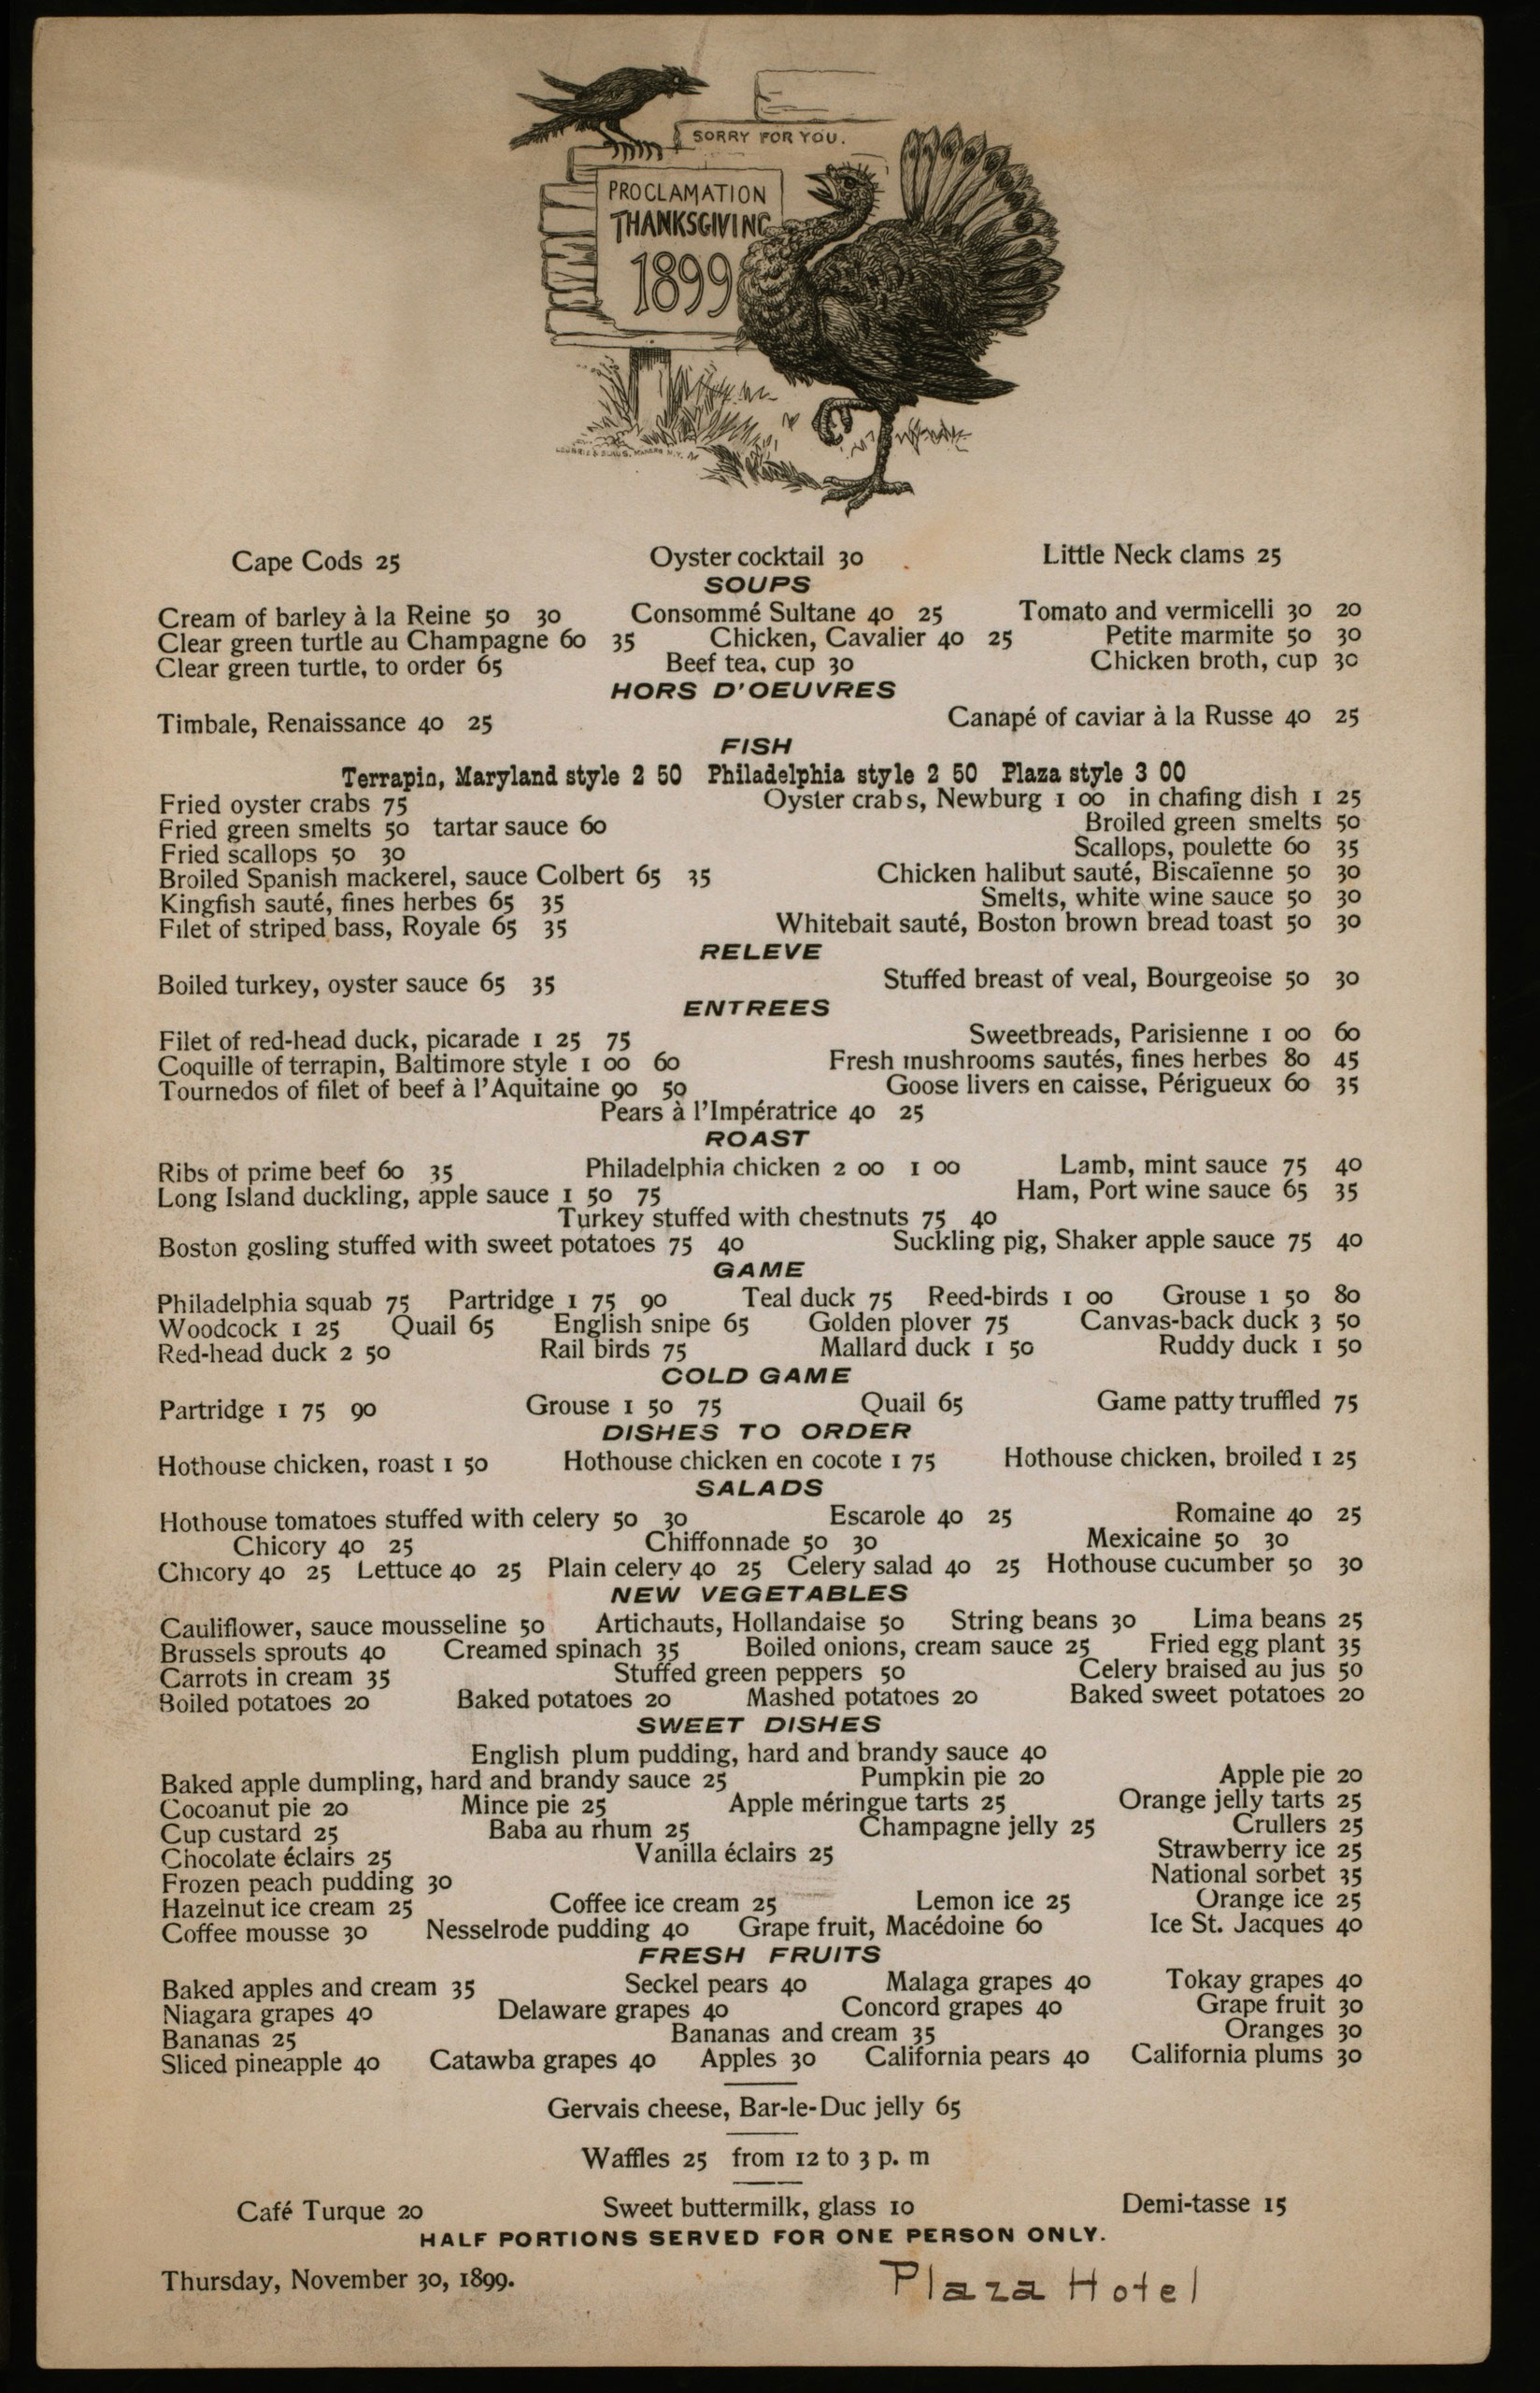 Thanksgiving Dinner menu at the Plaza Hotel in New York, NY, 1899.